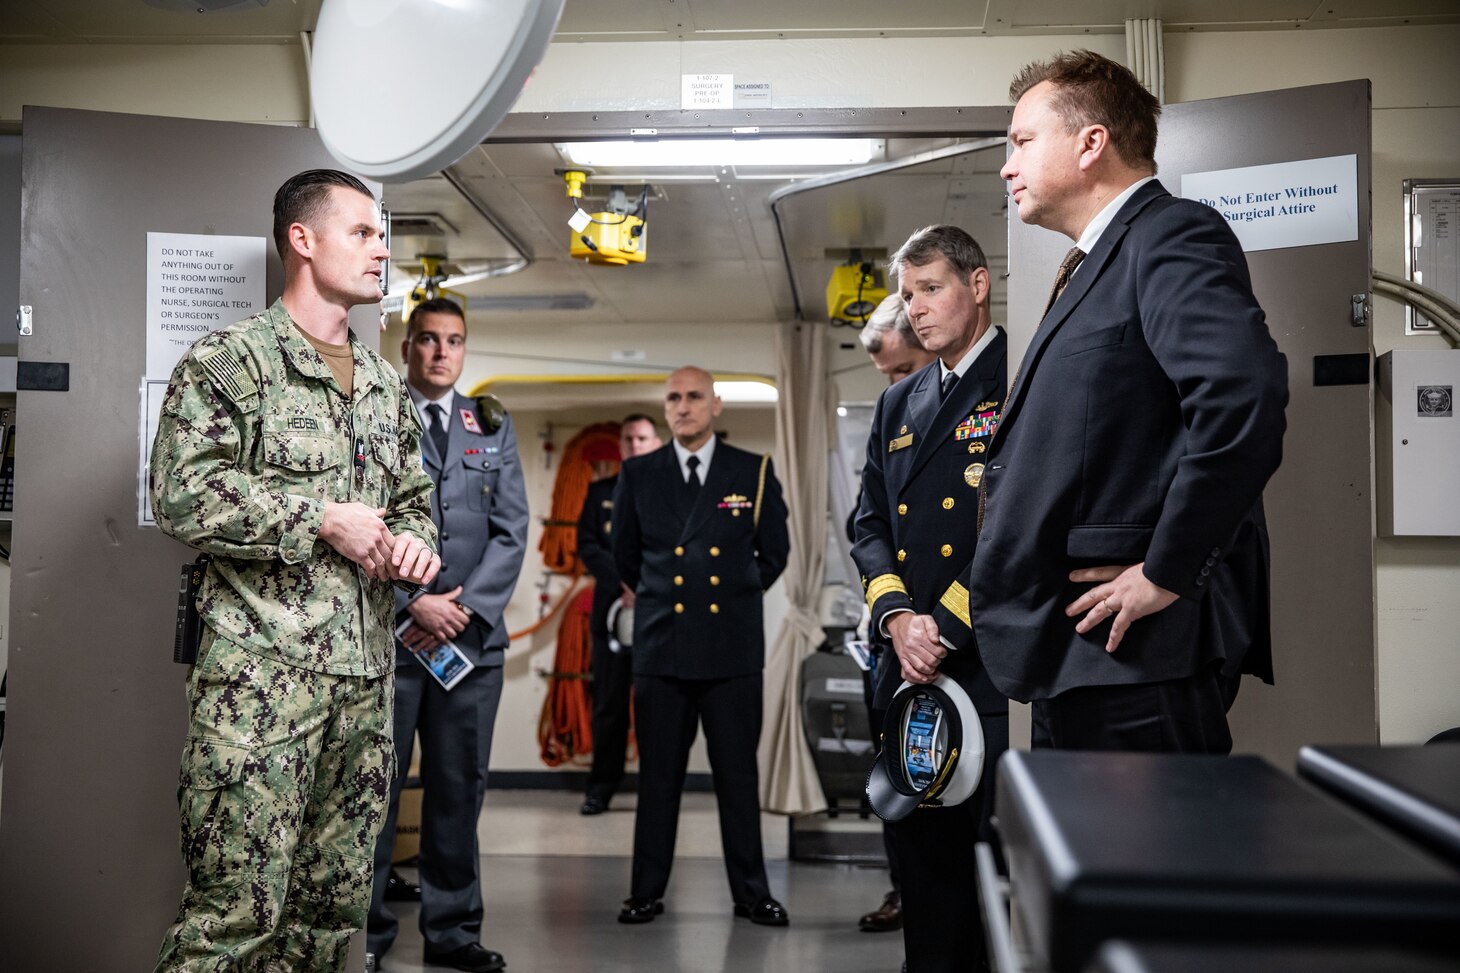 U.S. Navy Hospital Corpsman 2nd Class Mason Hedeen, left, assigned to the San Antonio-class amphibious transport dock ship USS Arlington (LPD 24), gives the Honorable Antti Kaikkonen, right, Finnish Minister of Defense, a tour of Arlington’s medical facilities at Naval Station Norfolk, Virginia, Dec. 4, 2022.